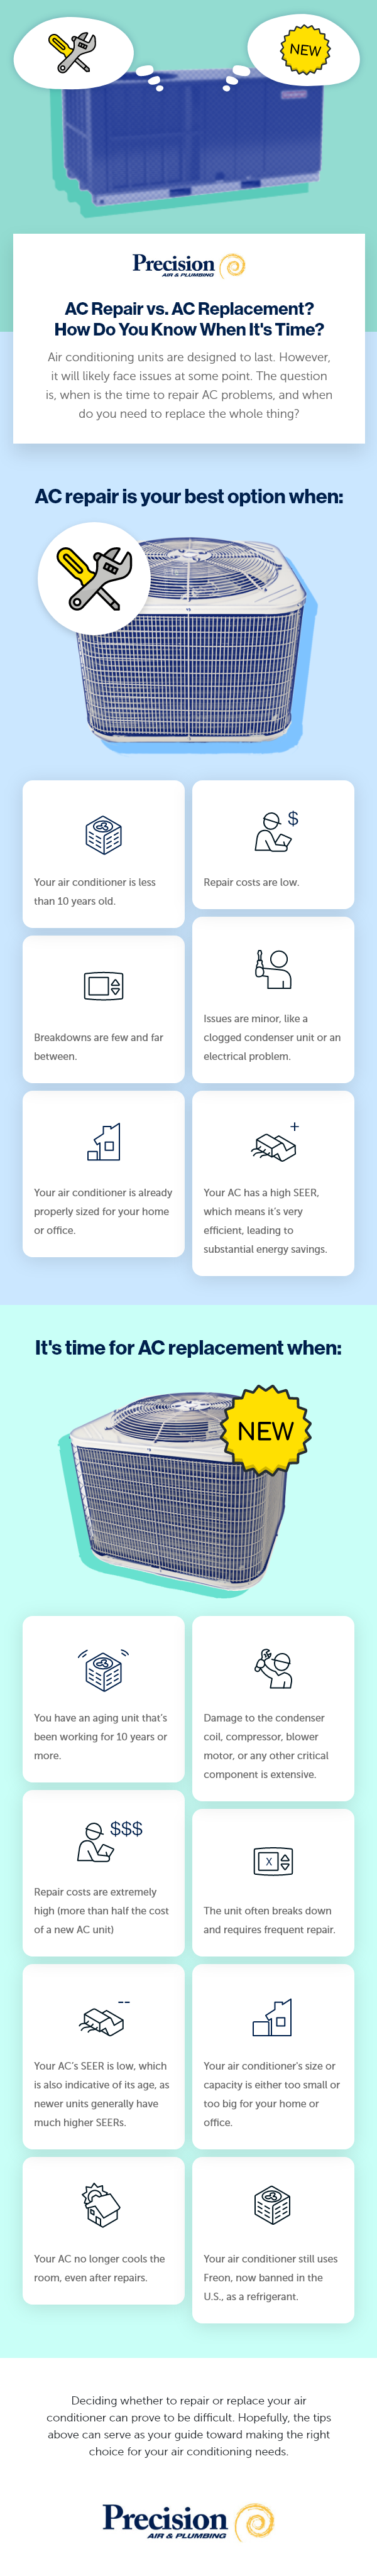 AC Repair Vs AC Replacement - How Do You Know When It's Time